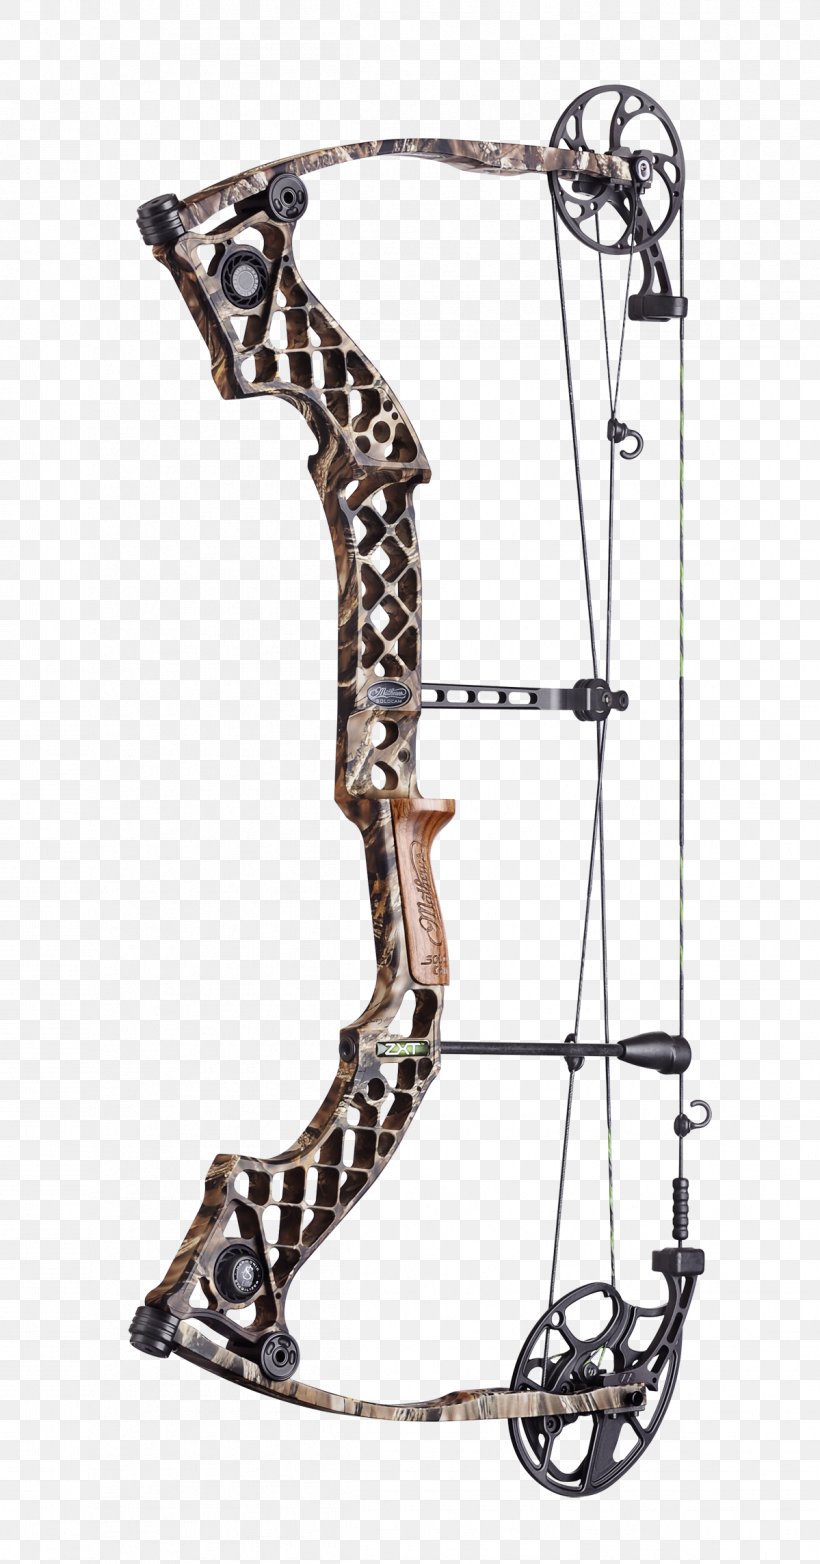 Bow And Arrow Mathews Archery, Inc. Compound Bows Bowhunting, PNG, 1199x2288px, Bow And Arrow, Archery, Bit, Bow, Bowhunting Download Free